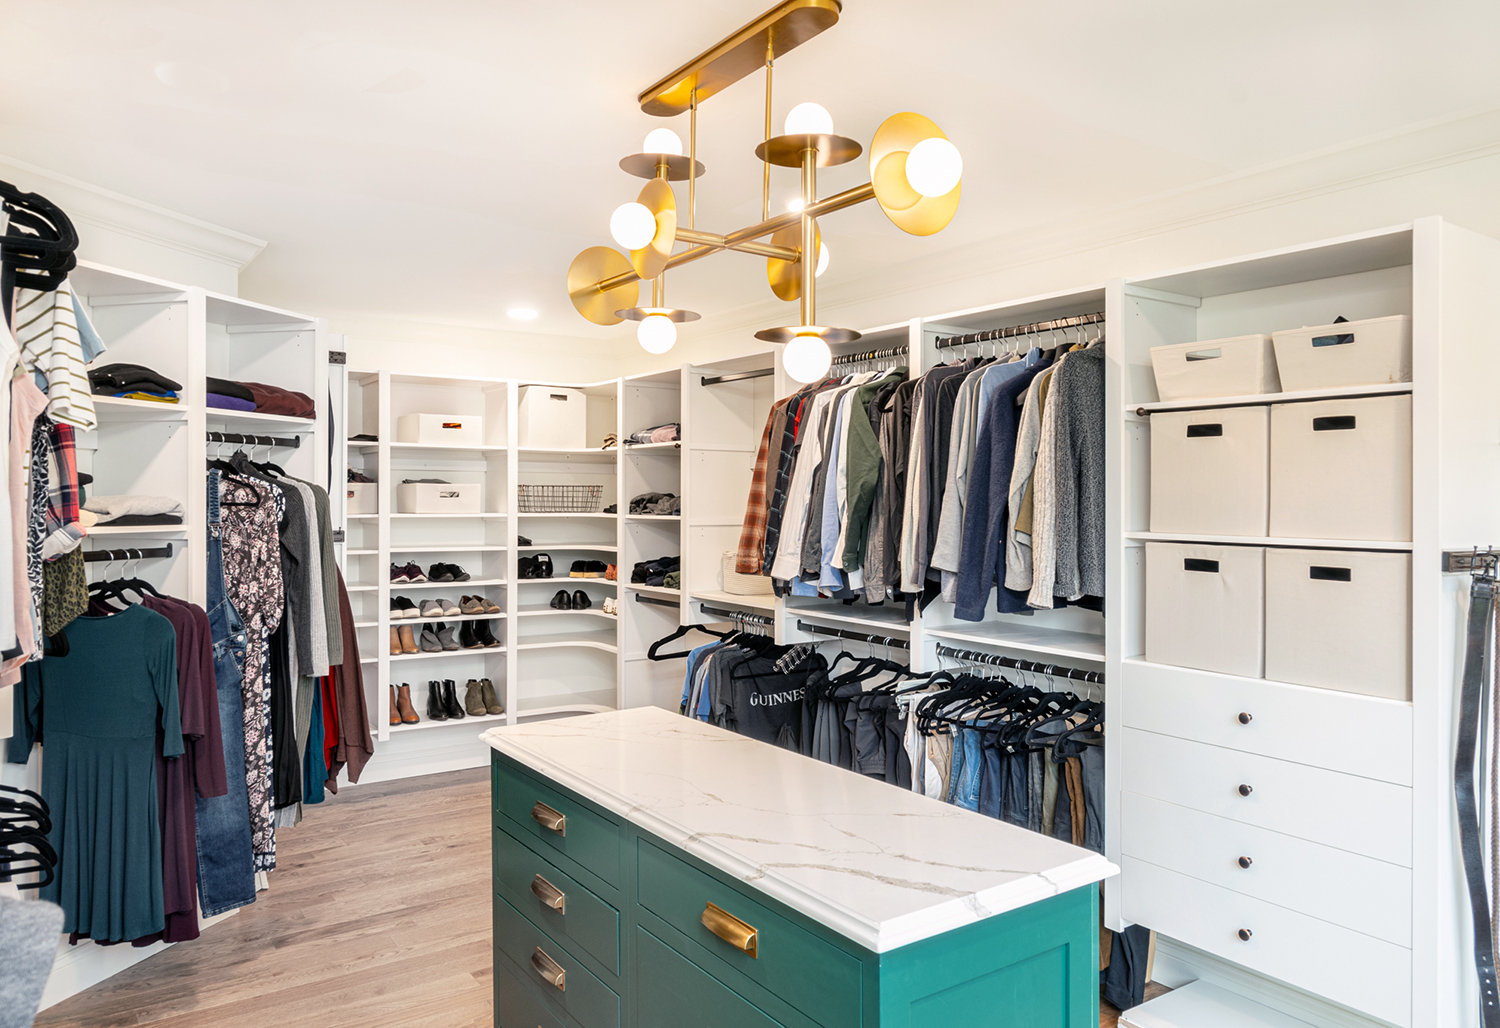 https://victoryclosets.com/wp-content/uploads/2022/02/Allentown-Owners-Closet-White-Angled-Walls-web.jpg